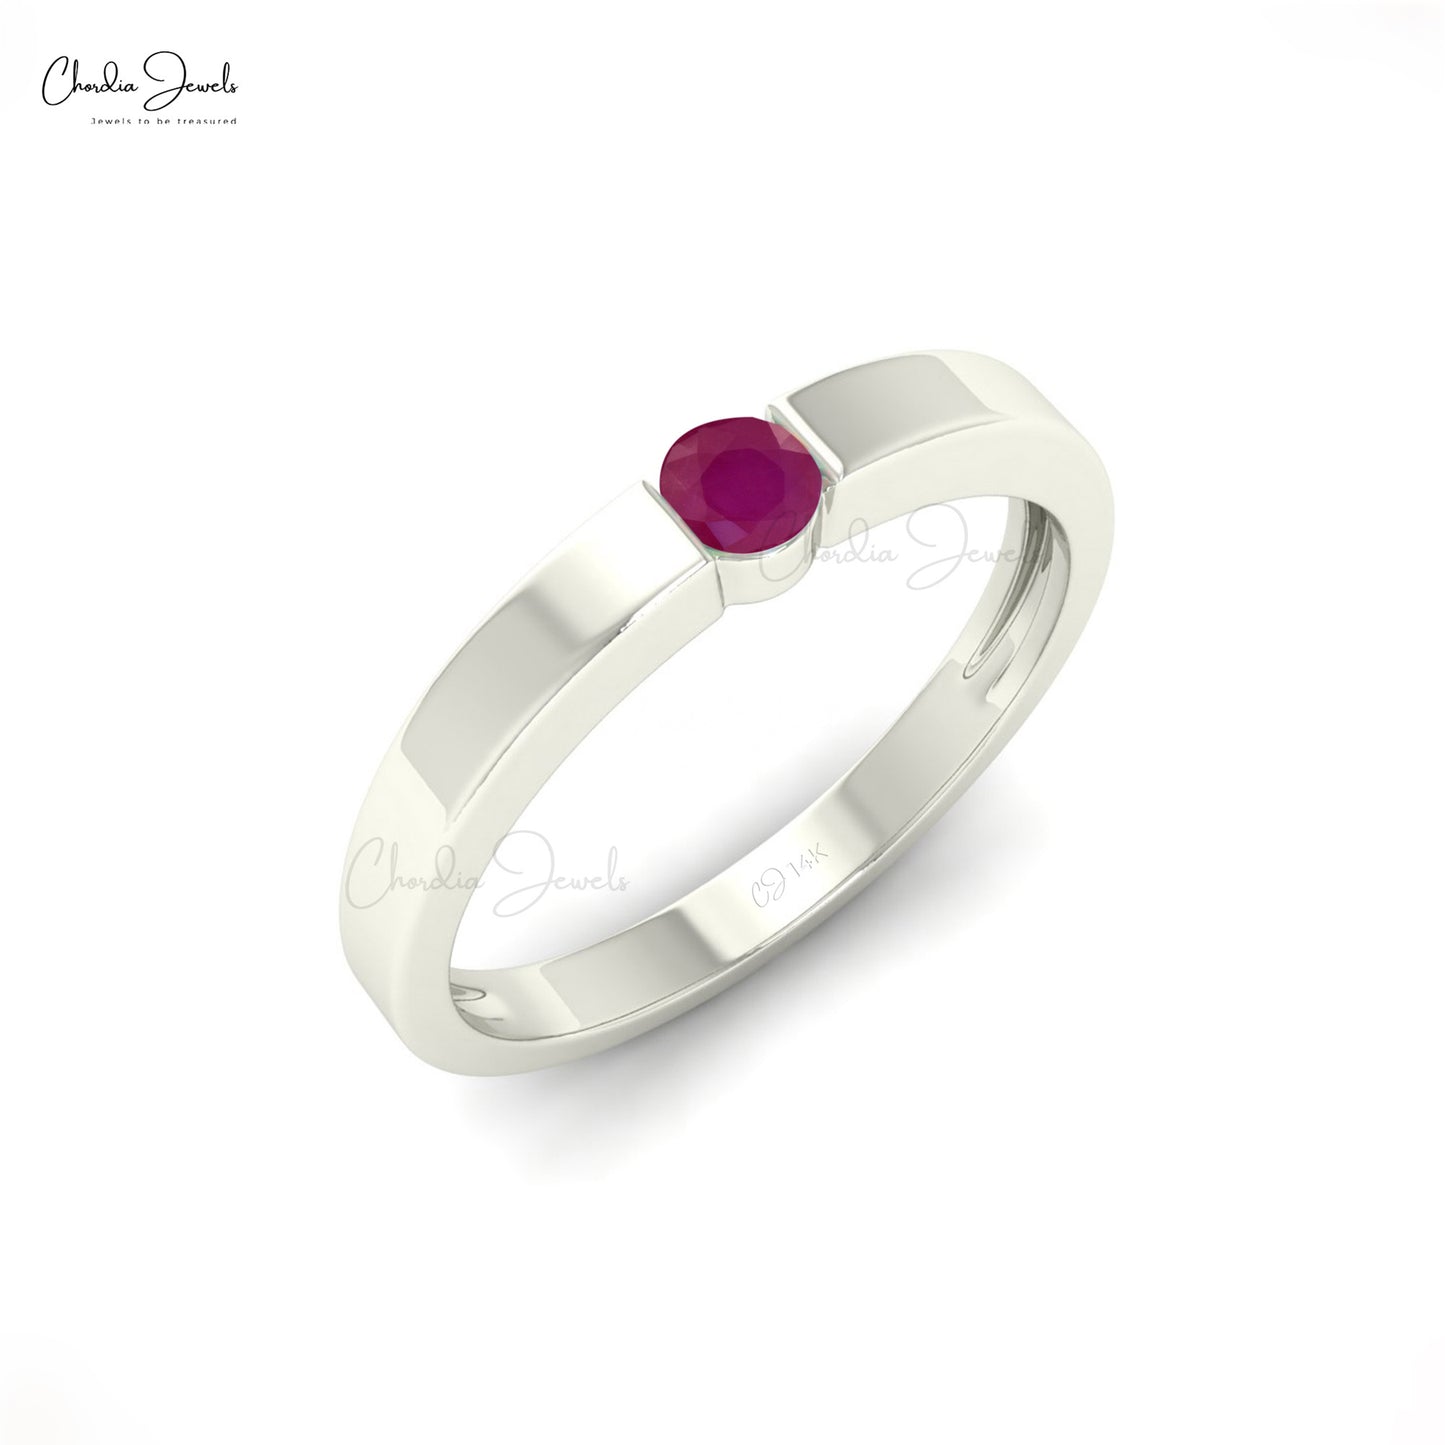 3mm Round Cut Natural Red Ruby Solitaire Ring For Her, 14k Solid Gold Gemstone Ring For Wedding Gift